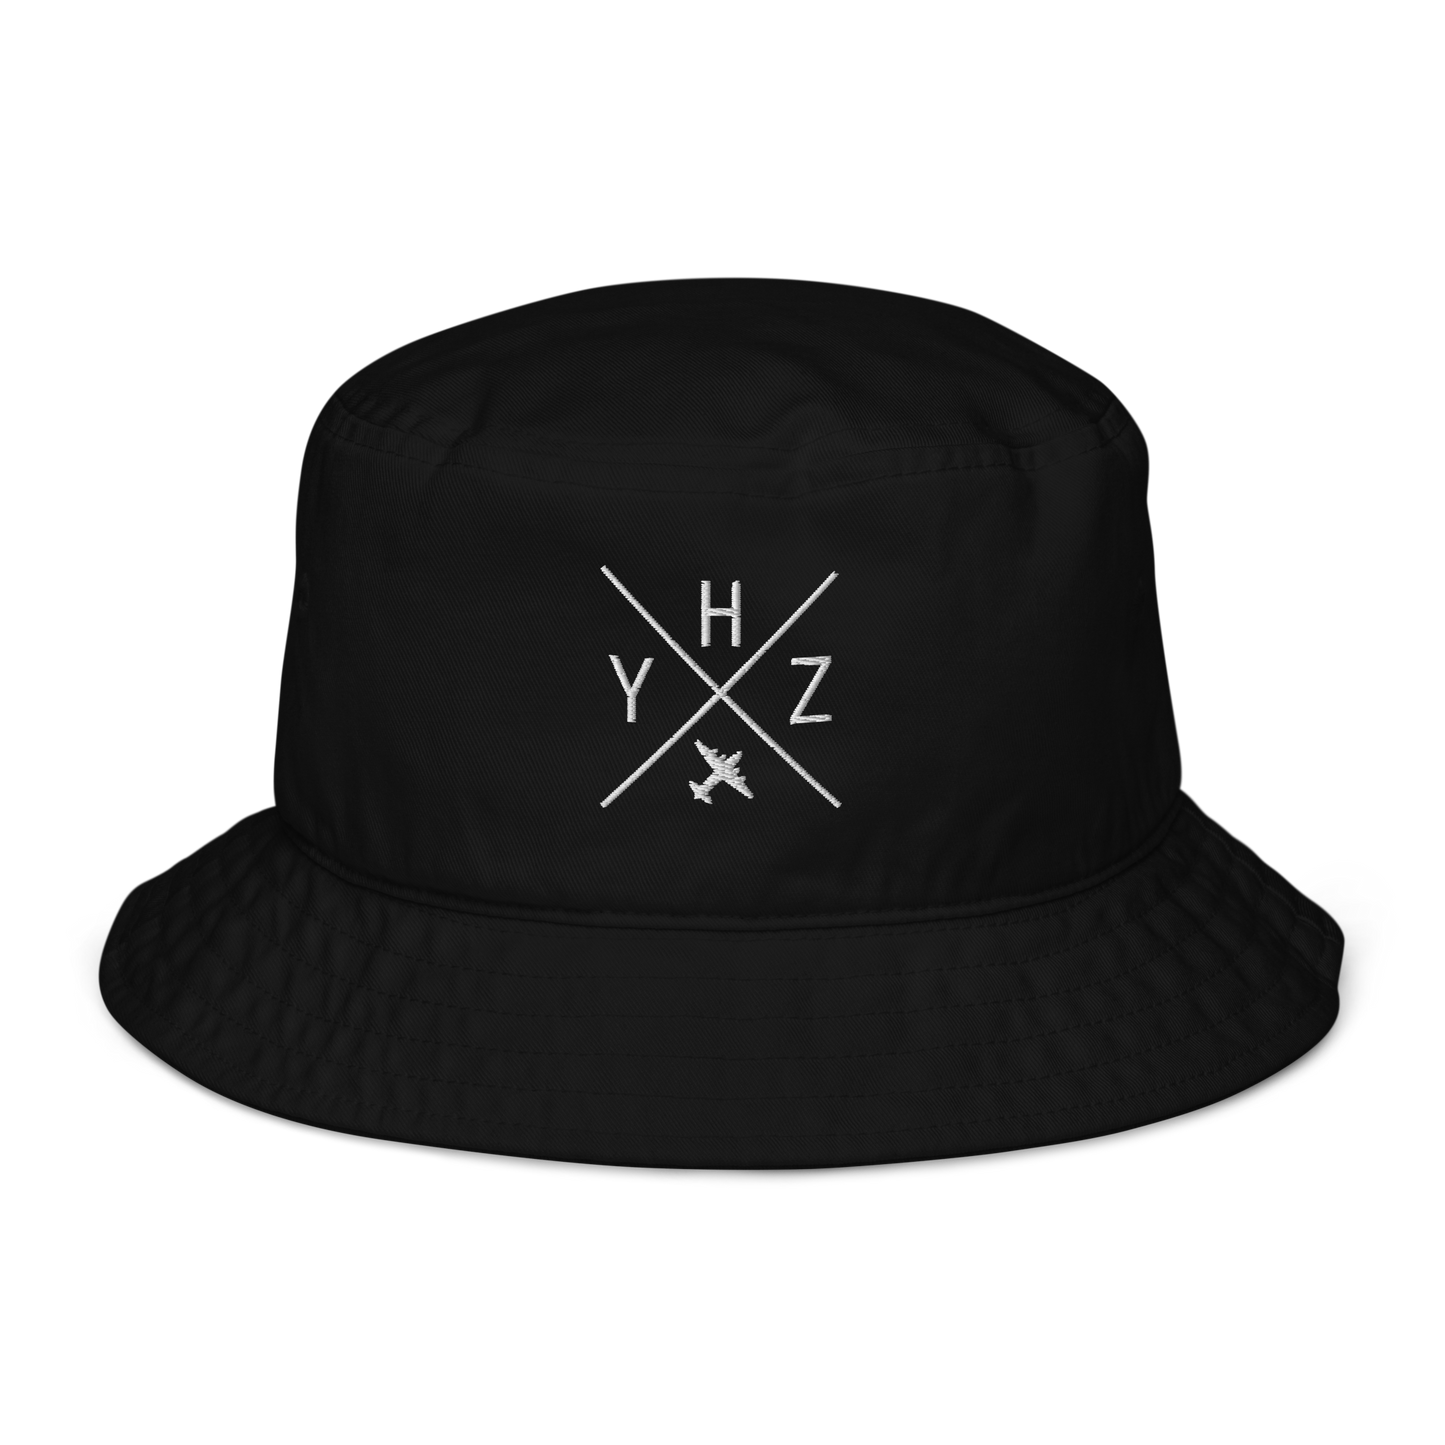 YHM Designs - YHZ Halifax Organic Cotton Bucket Hat - Crossed-X Design with Airport Code and Vintage Propliner - White Embroidery - Image 01